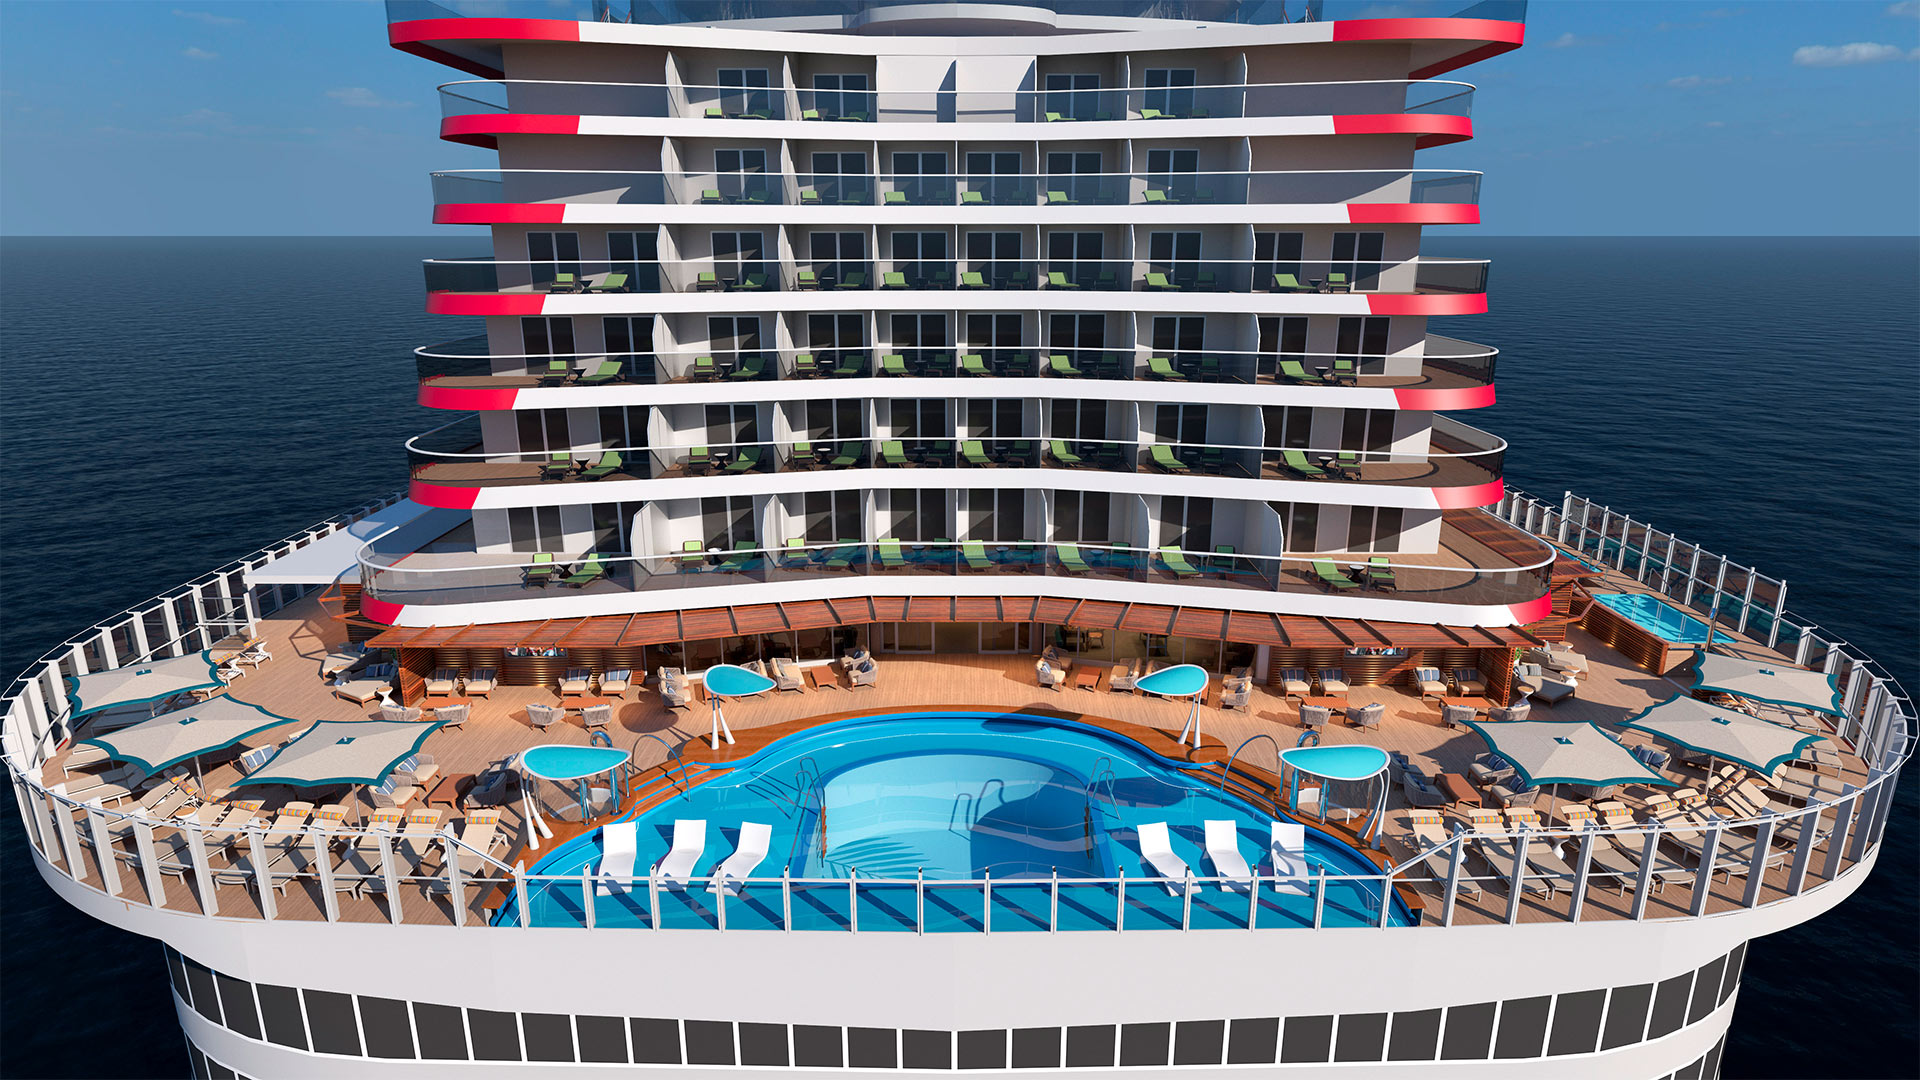 Carnival's next cruise ship will be named Carnival Celebration Cruise